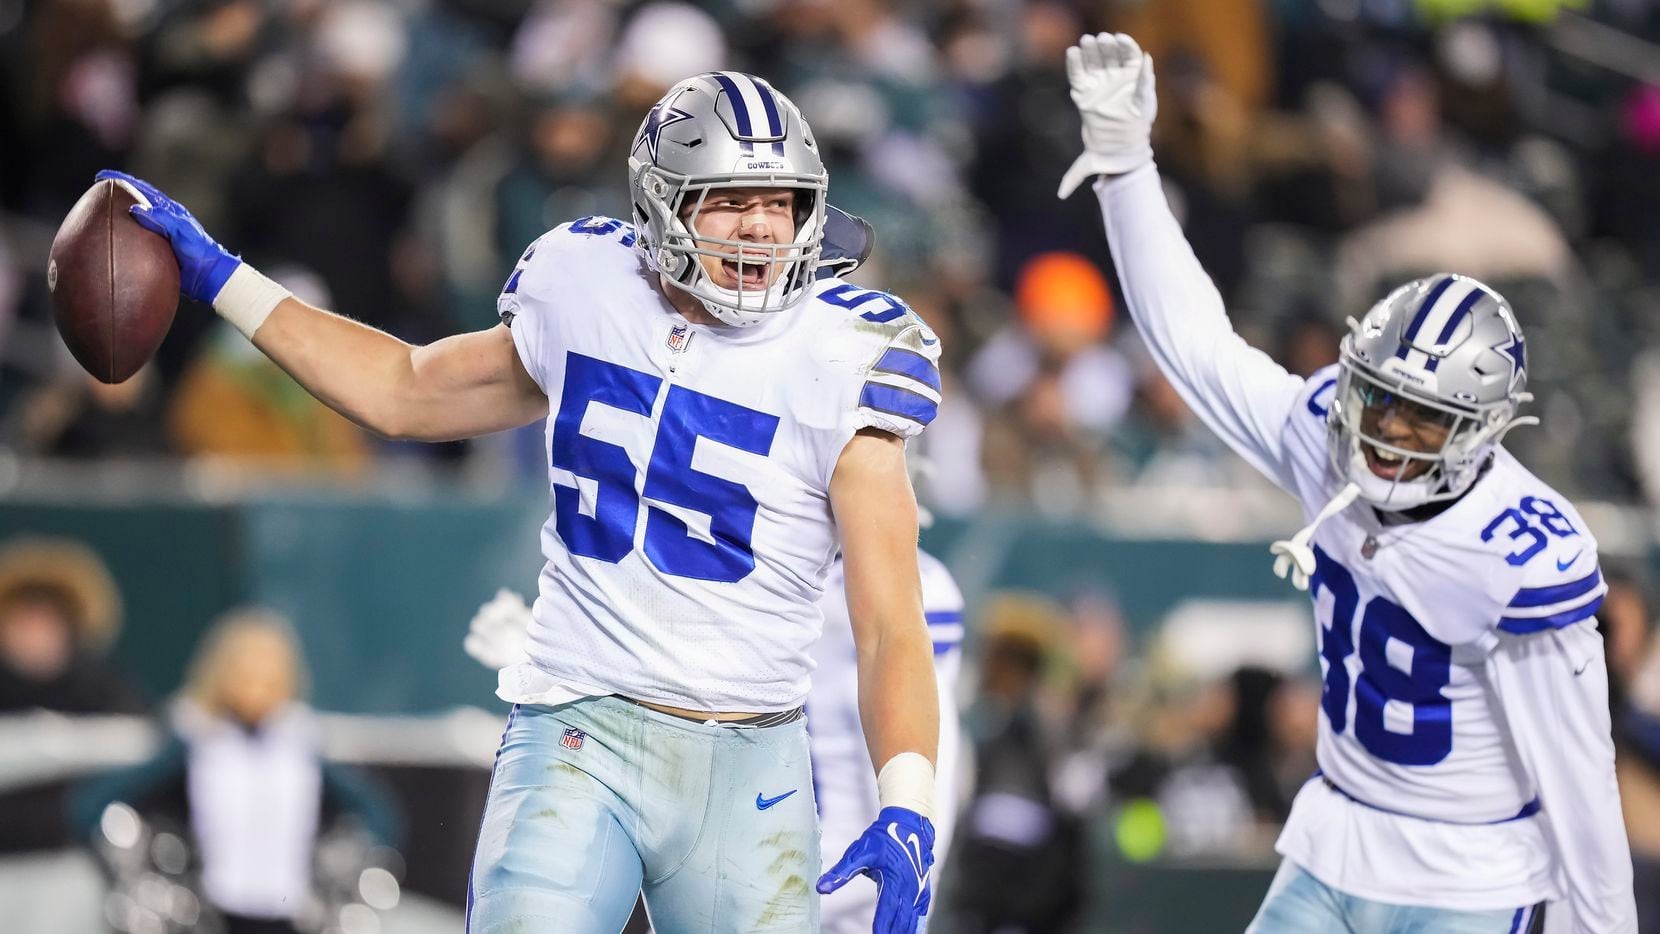 Dallas Cowboys outside linebacker Leighton Vander Esch (55) celebrates after intercepting a pass during the second half of an NFL football game against the Philadelphia Eagles at Lincoln Financial Field on Saturday, Jan. 8, 2022.